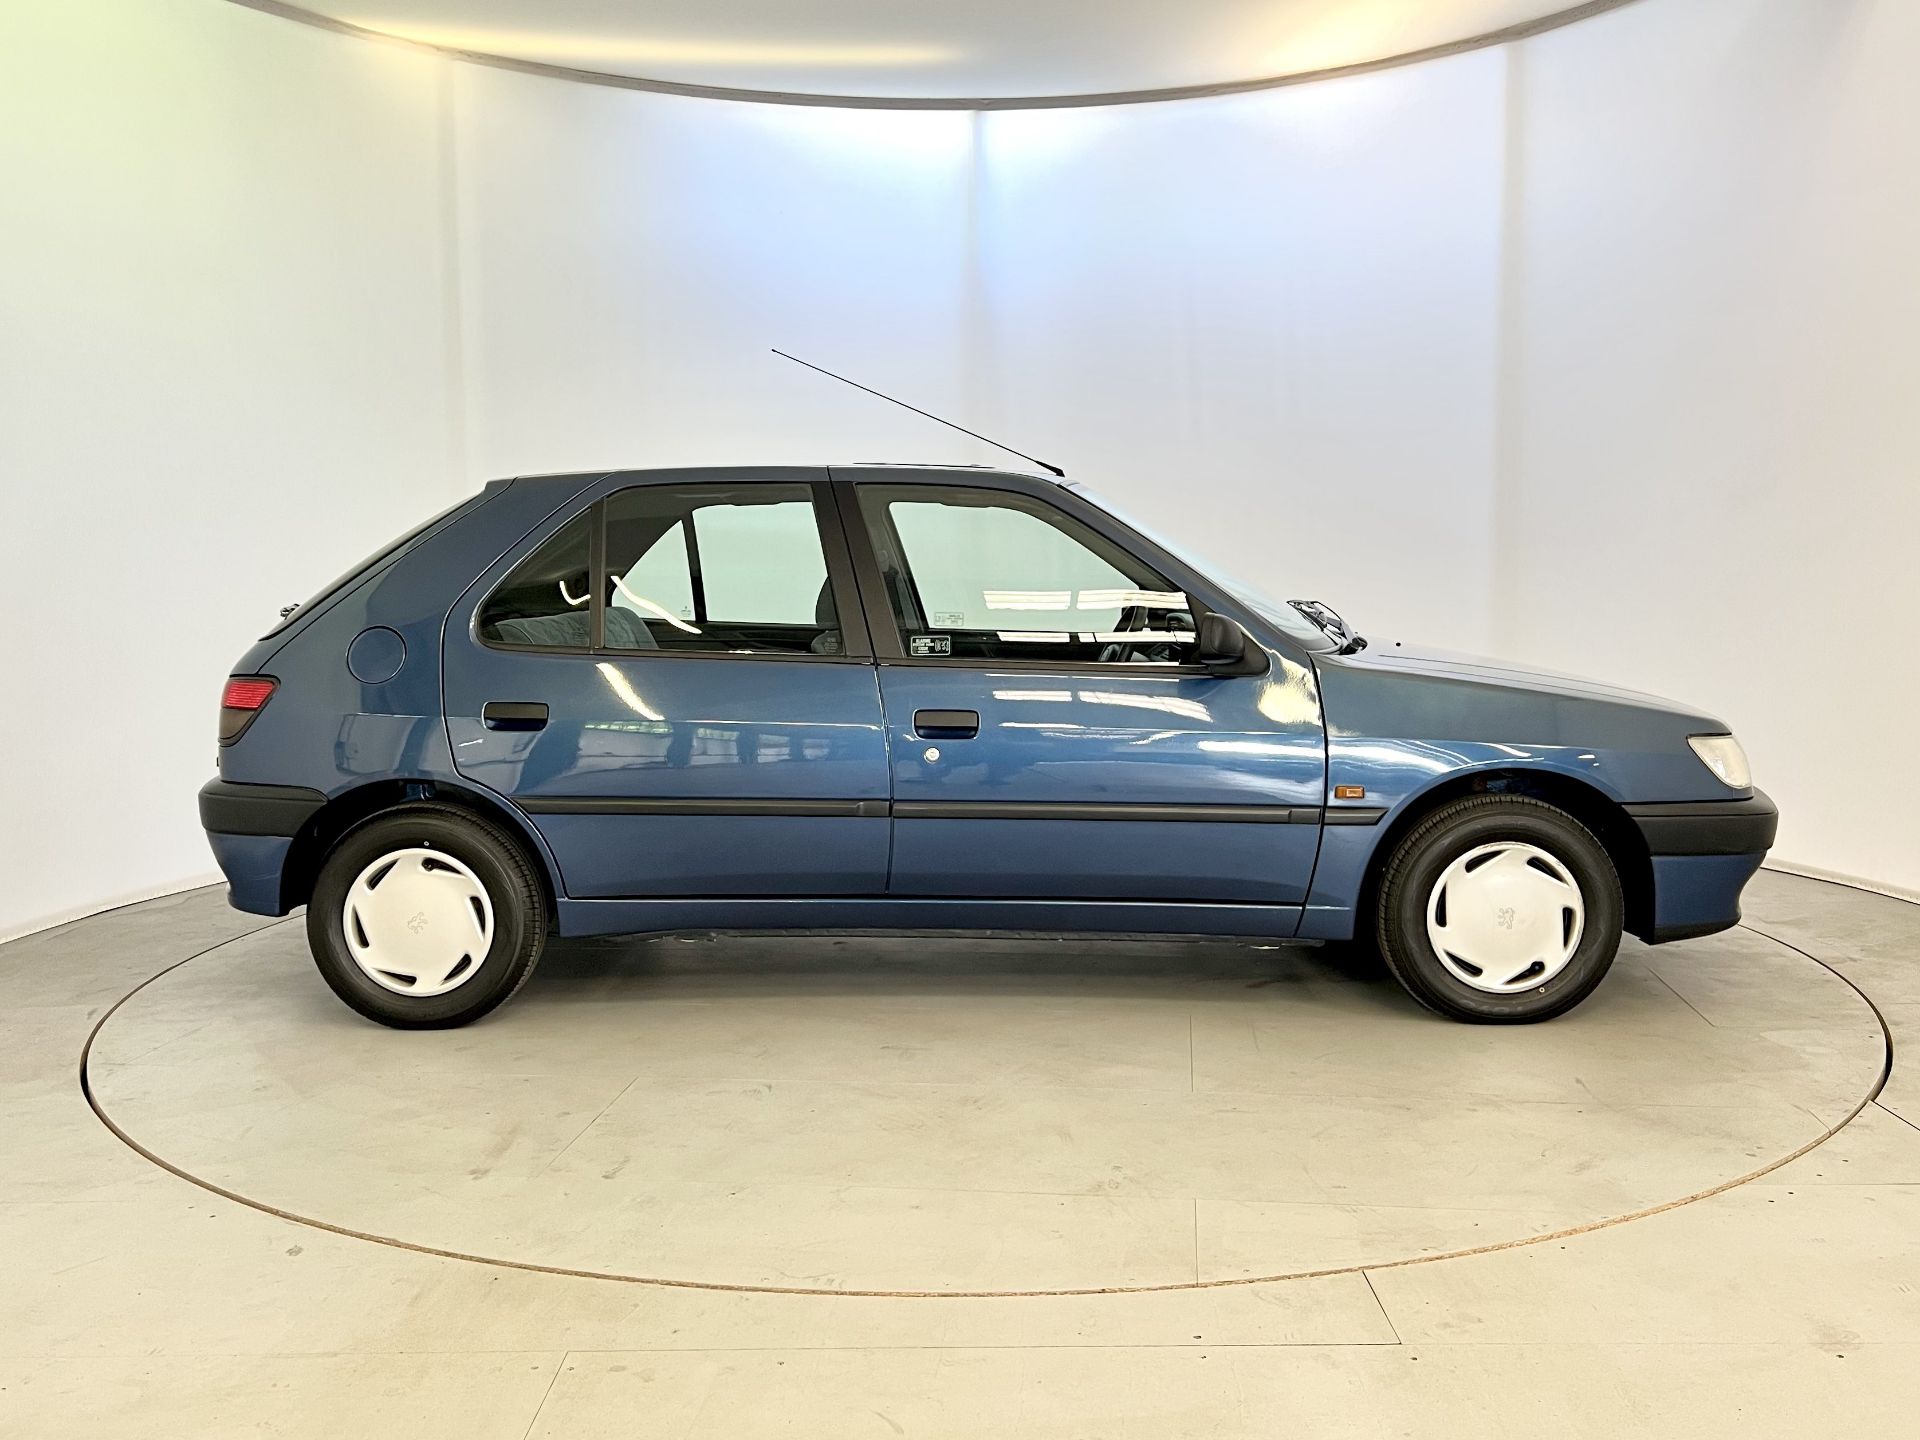 Peugeot 306 - Image 11 of 36